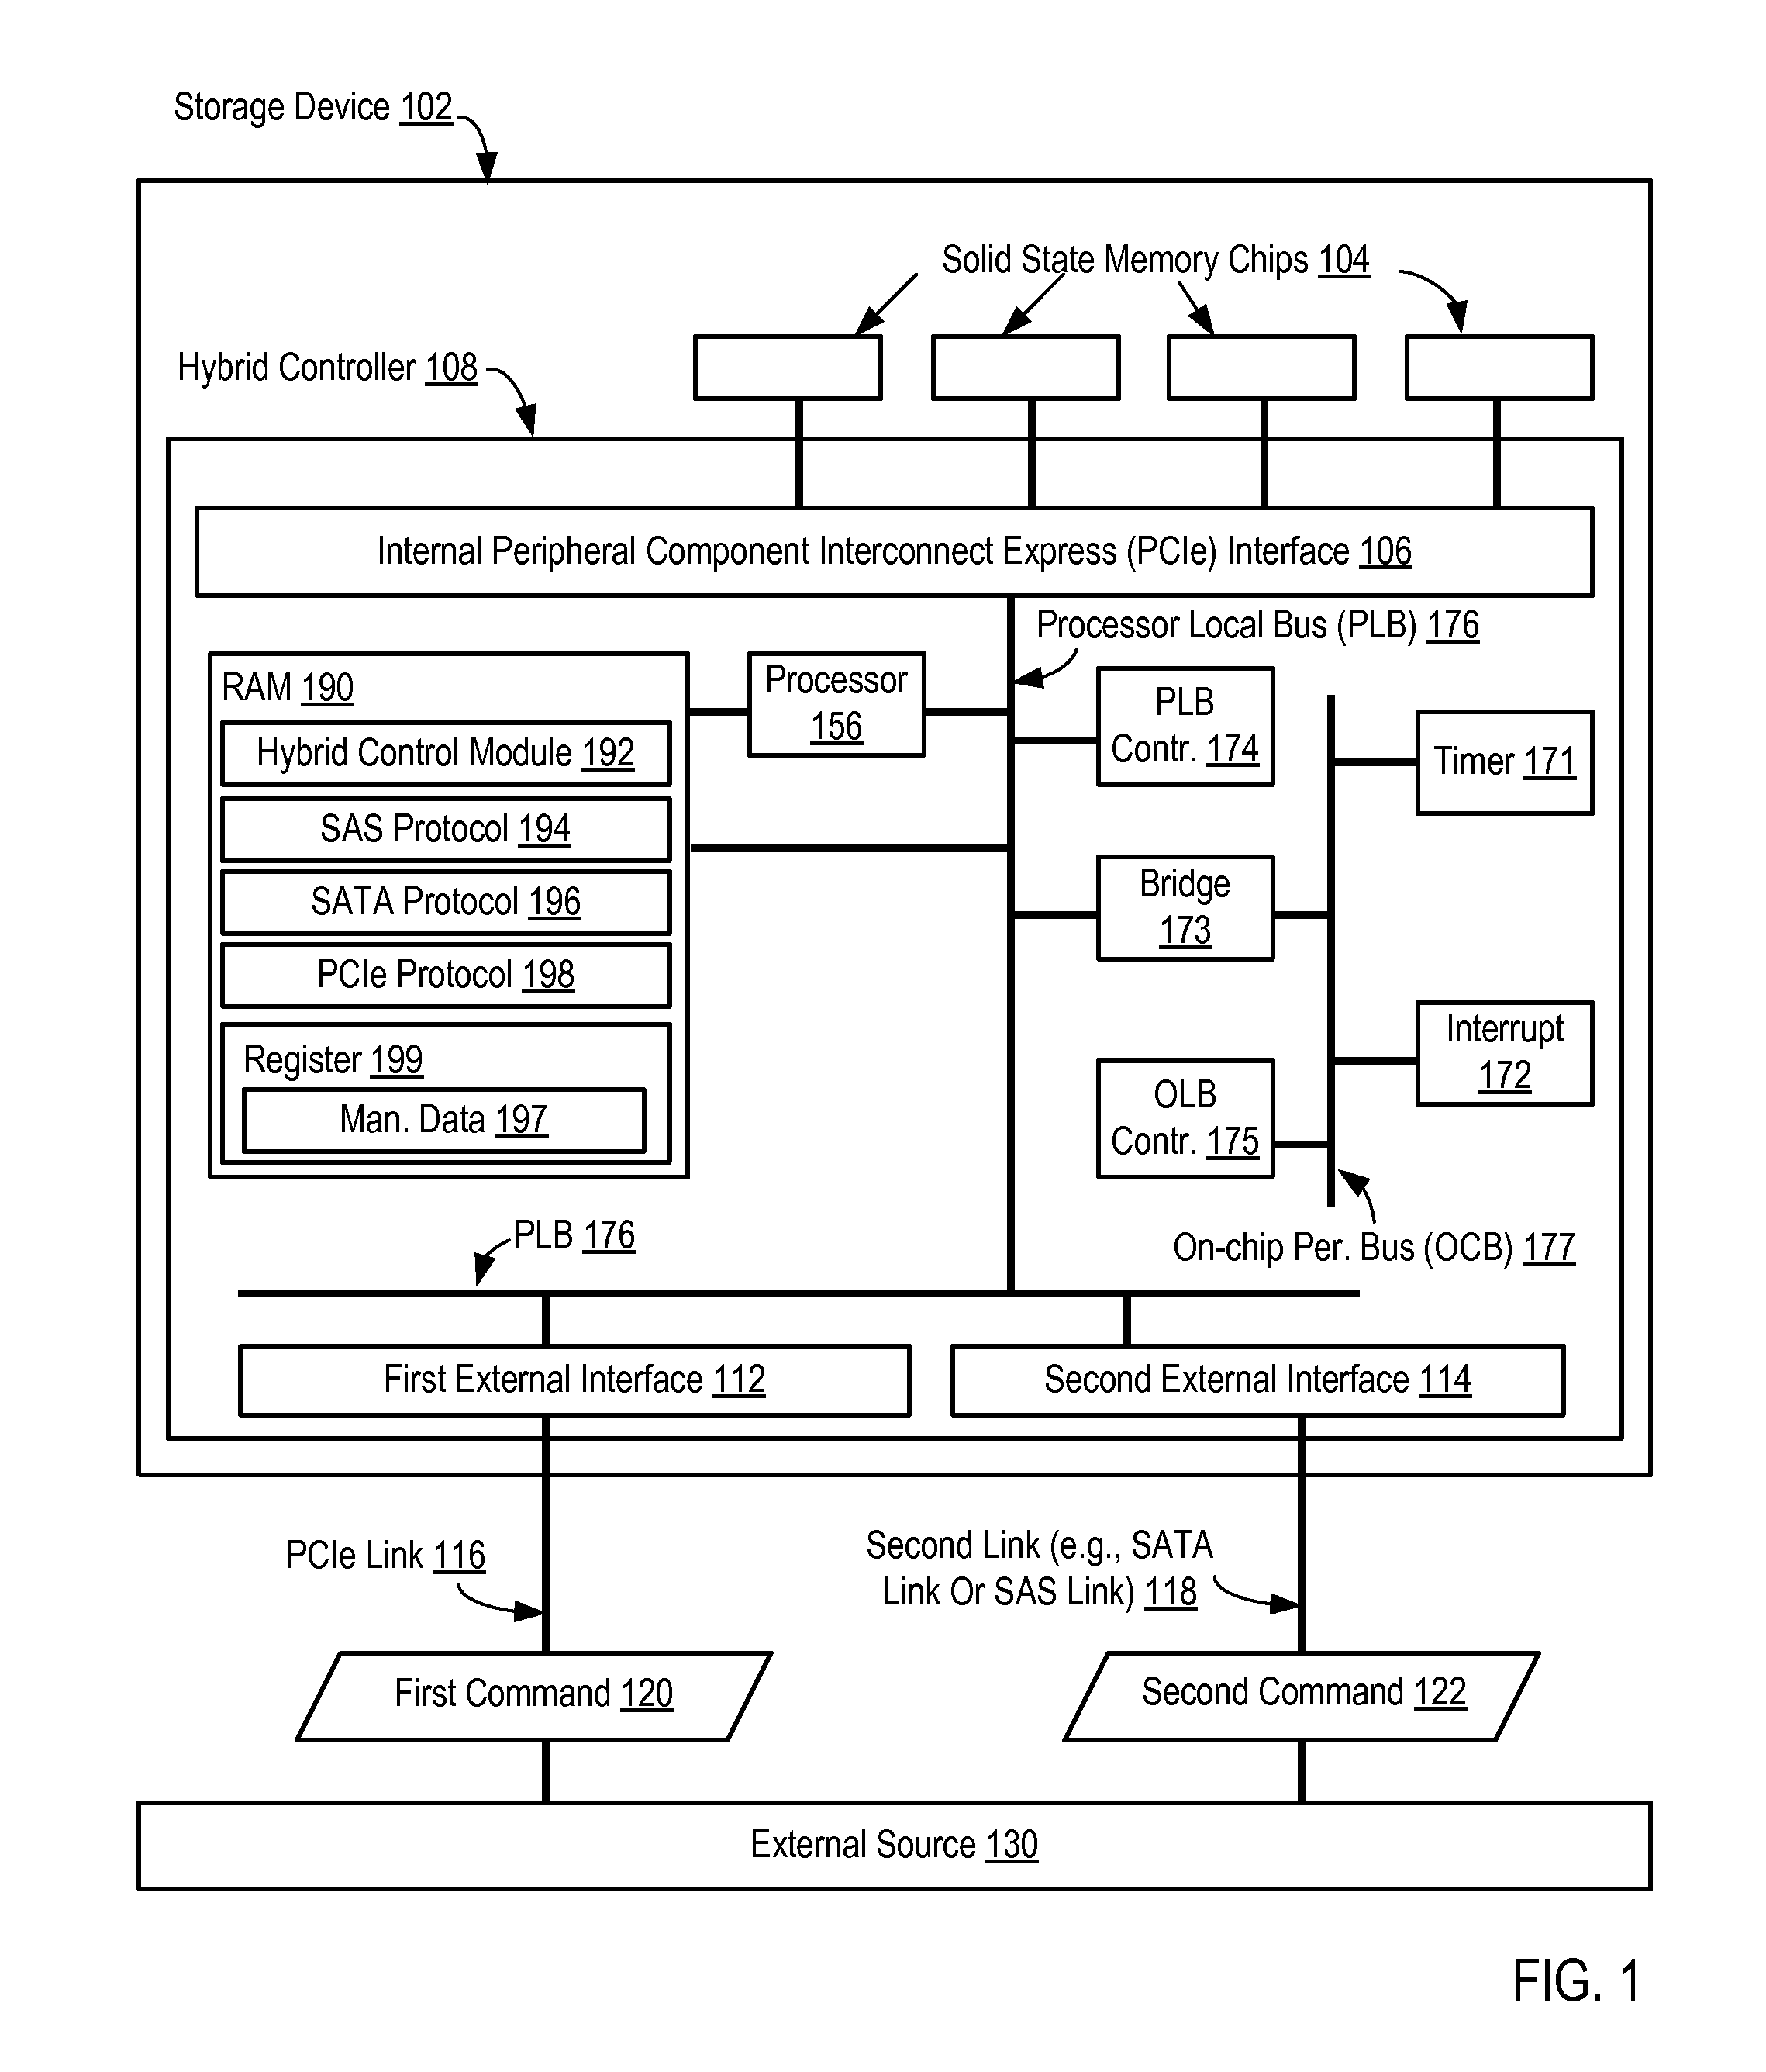 Managing A Storage Device Using A Hybrid Controller